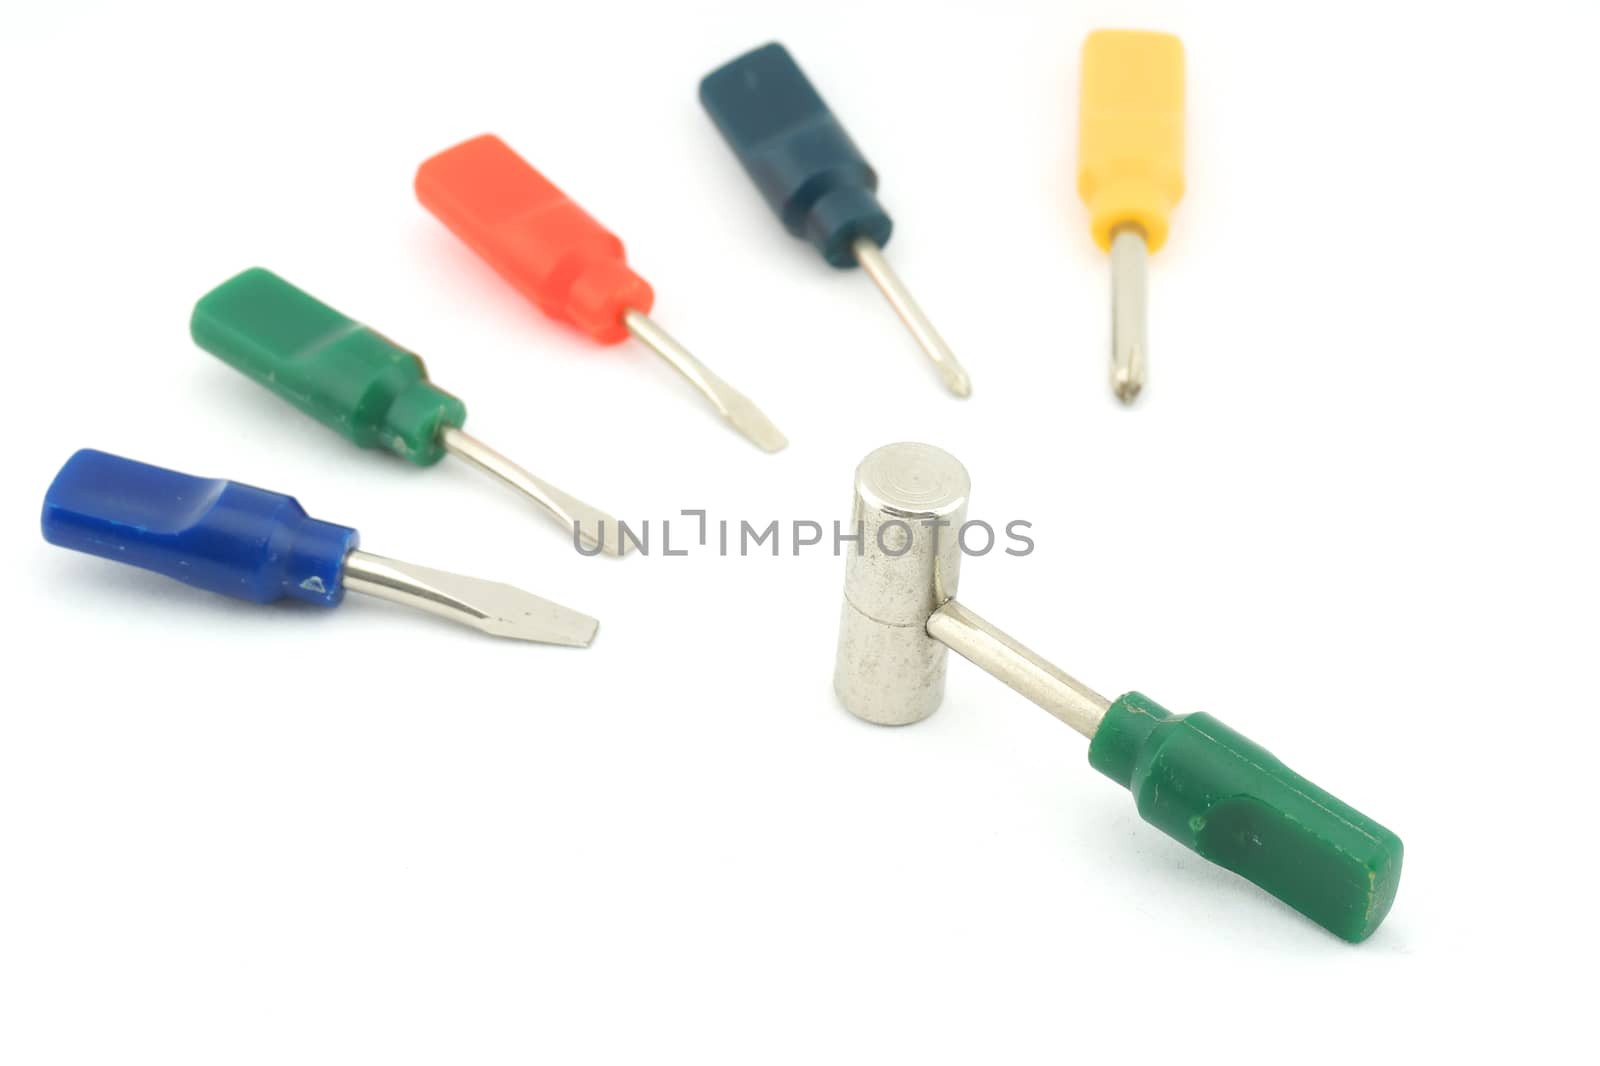 Colorful small screwdriver and a hammer use for minor repair with white background.